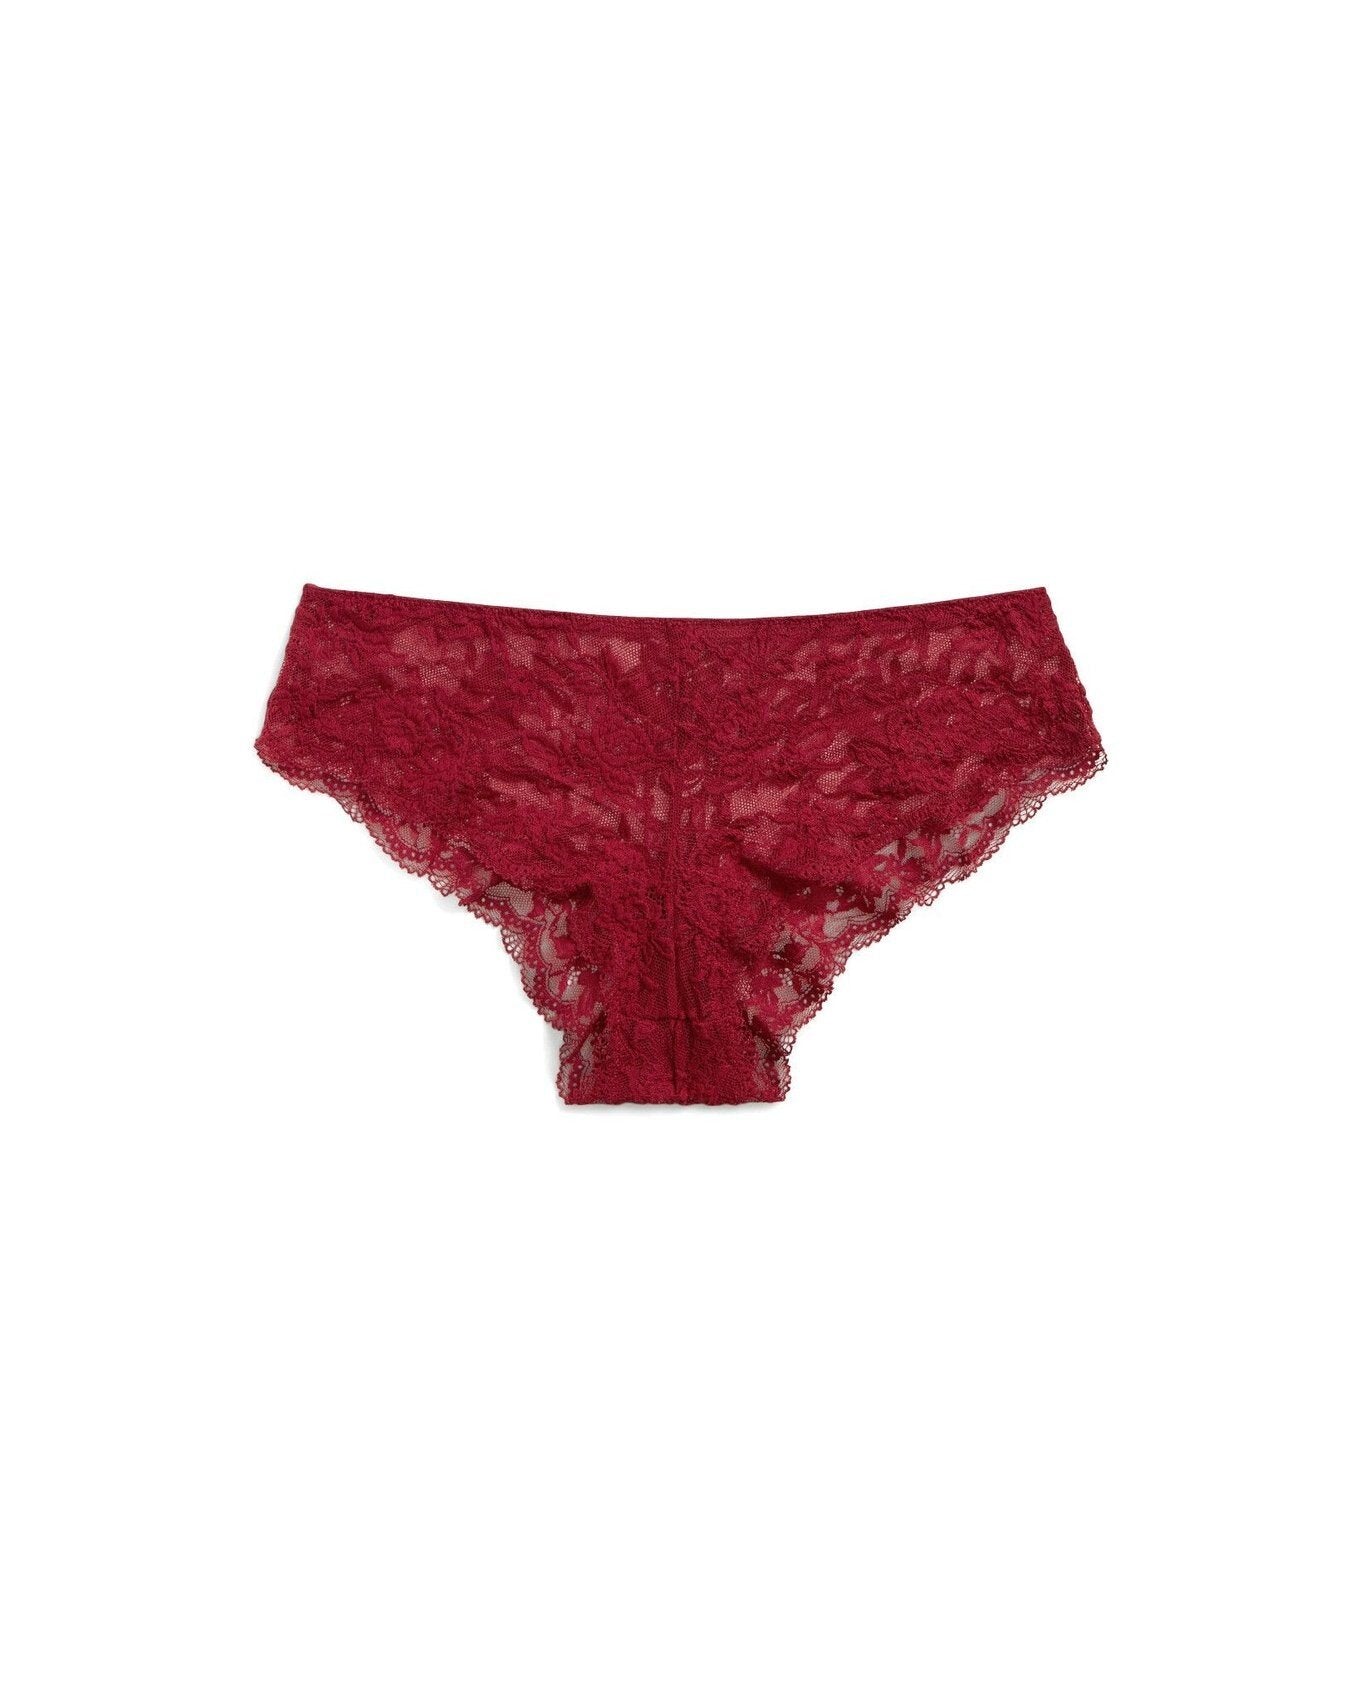 Adore Me Gia Cheeky in color Rhubarb and shape cheeky